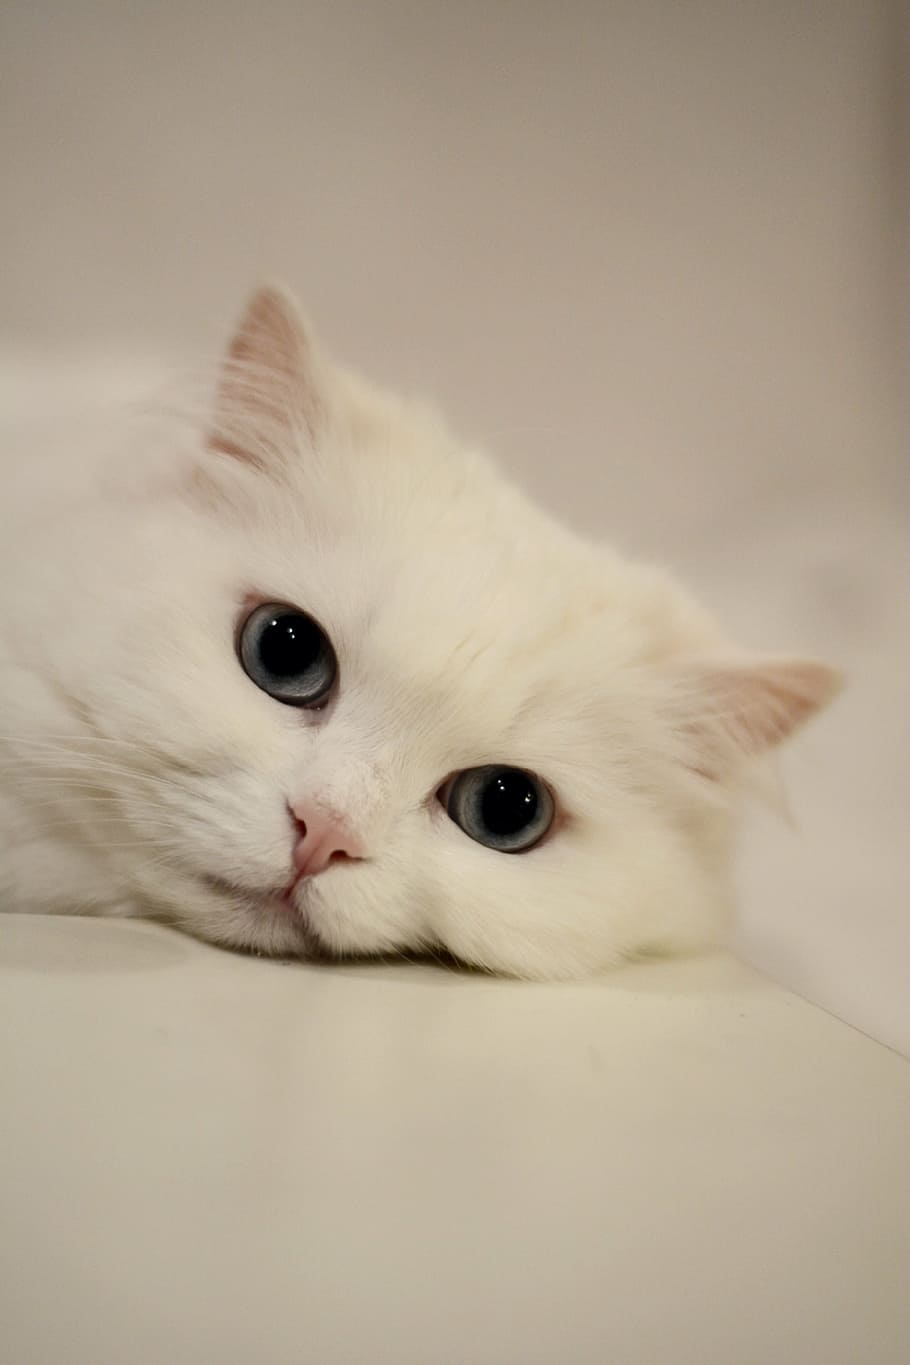 white cat on white surface, eyes, cat's eyes, domestic cat, calm cat